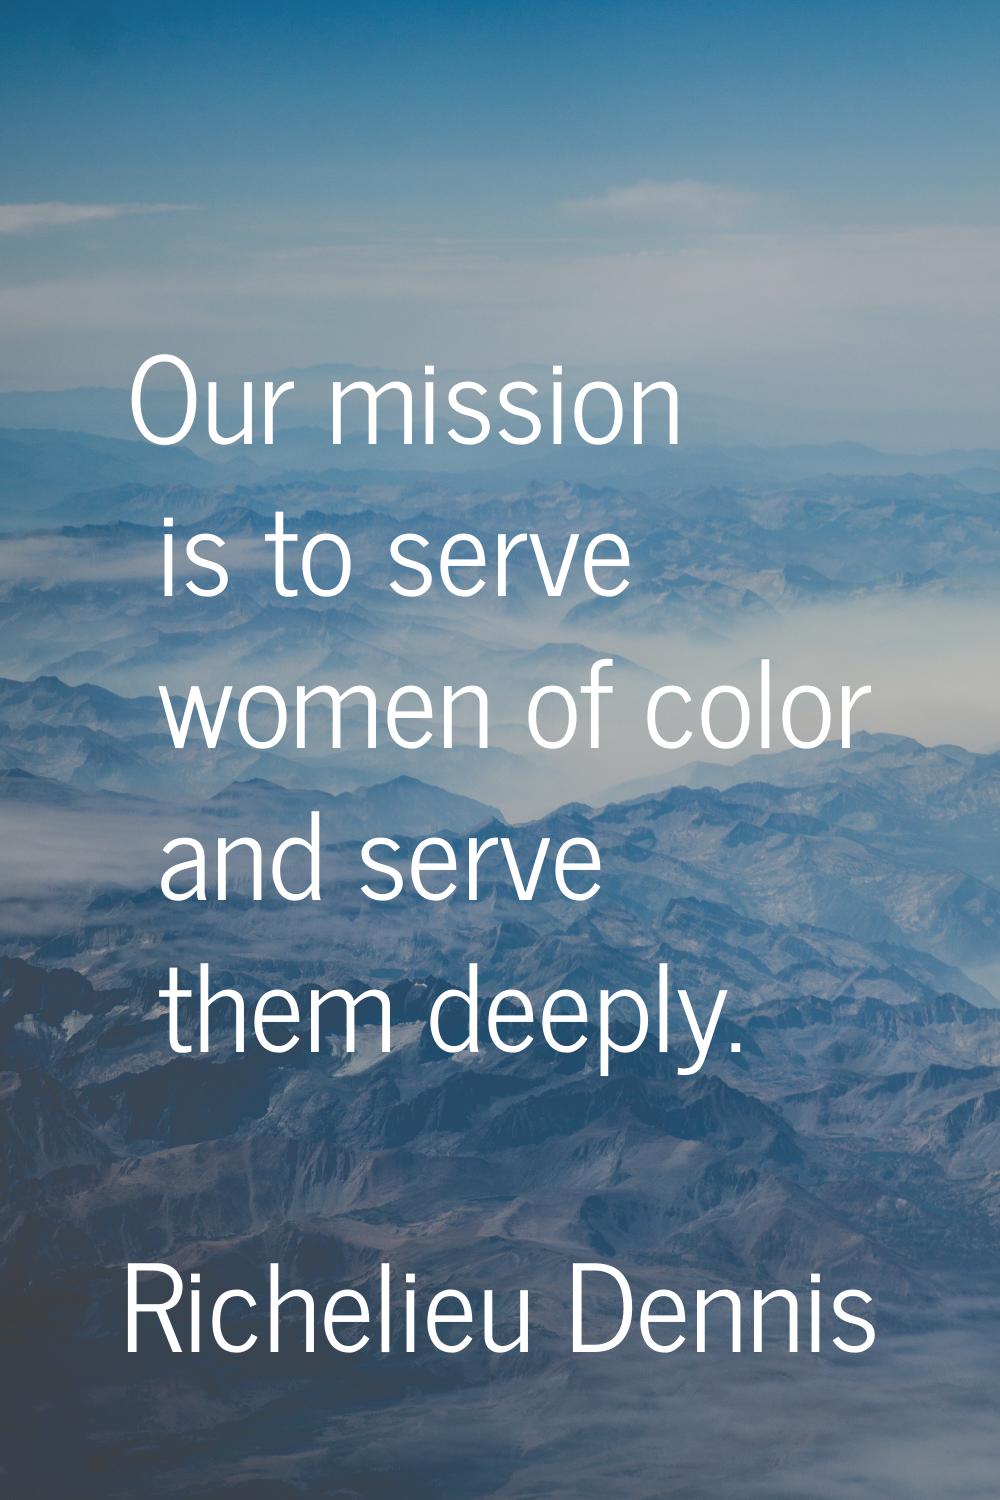 Our mission is to serve women of color and serve them deeply.